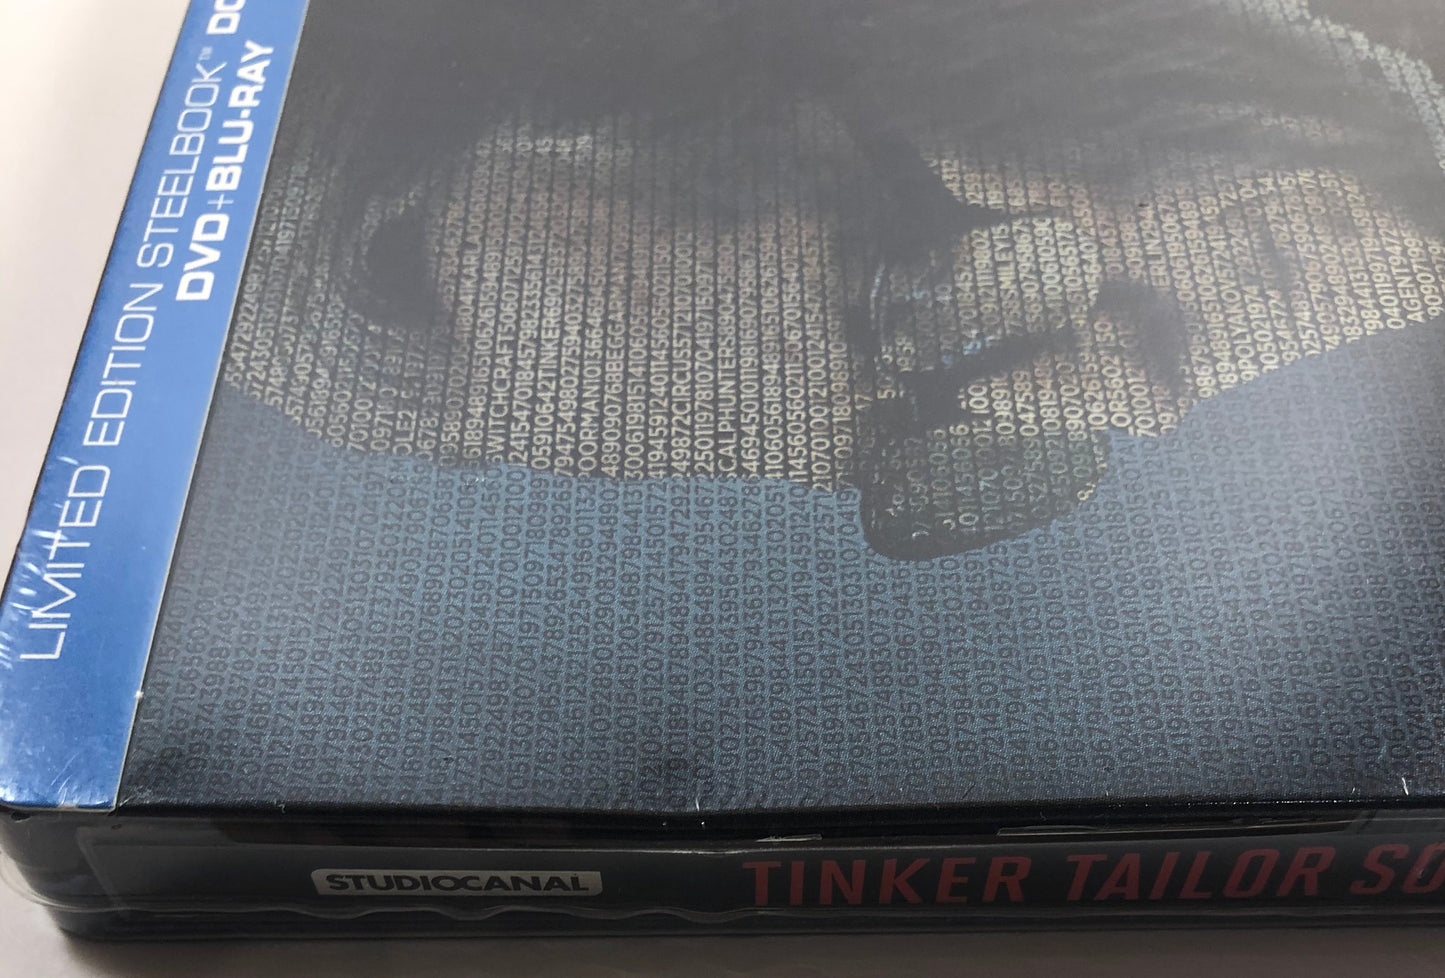 Tinker Tailor Soldier Spy Blu-Ray Steelbook **Small Dent**